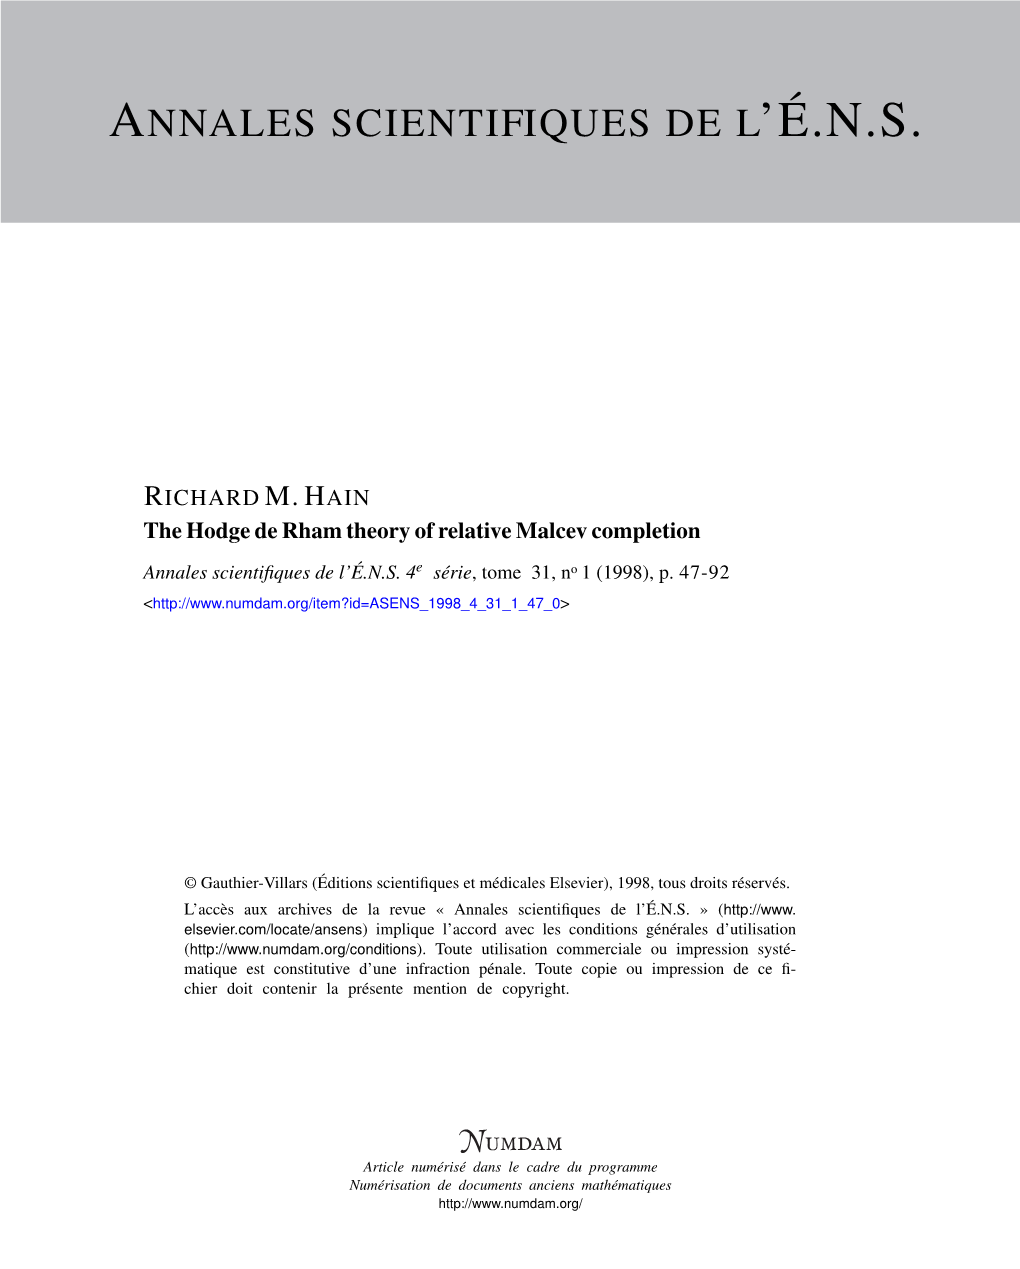 The Hodge De Rham Theory of Relative Malcev Completion